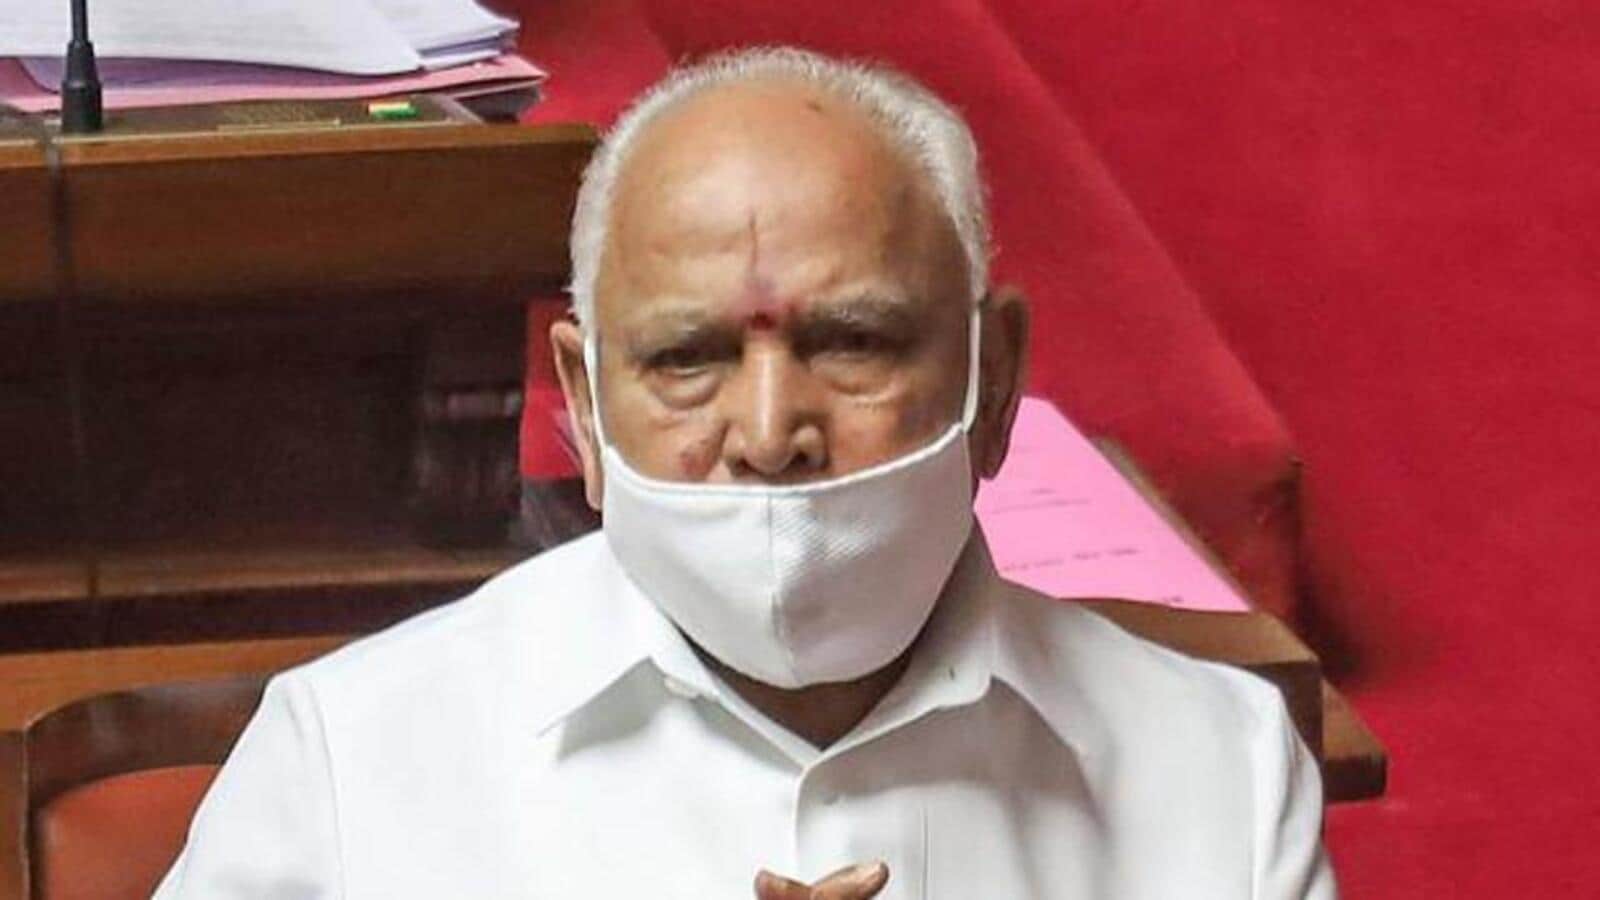 BSY says naming Shivamogga airport after him not appropriate, requests state to reconsider